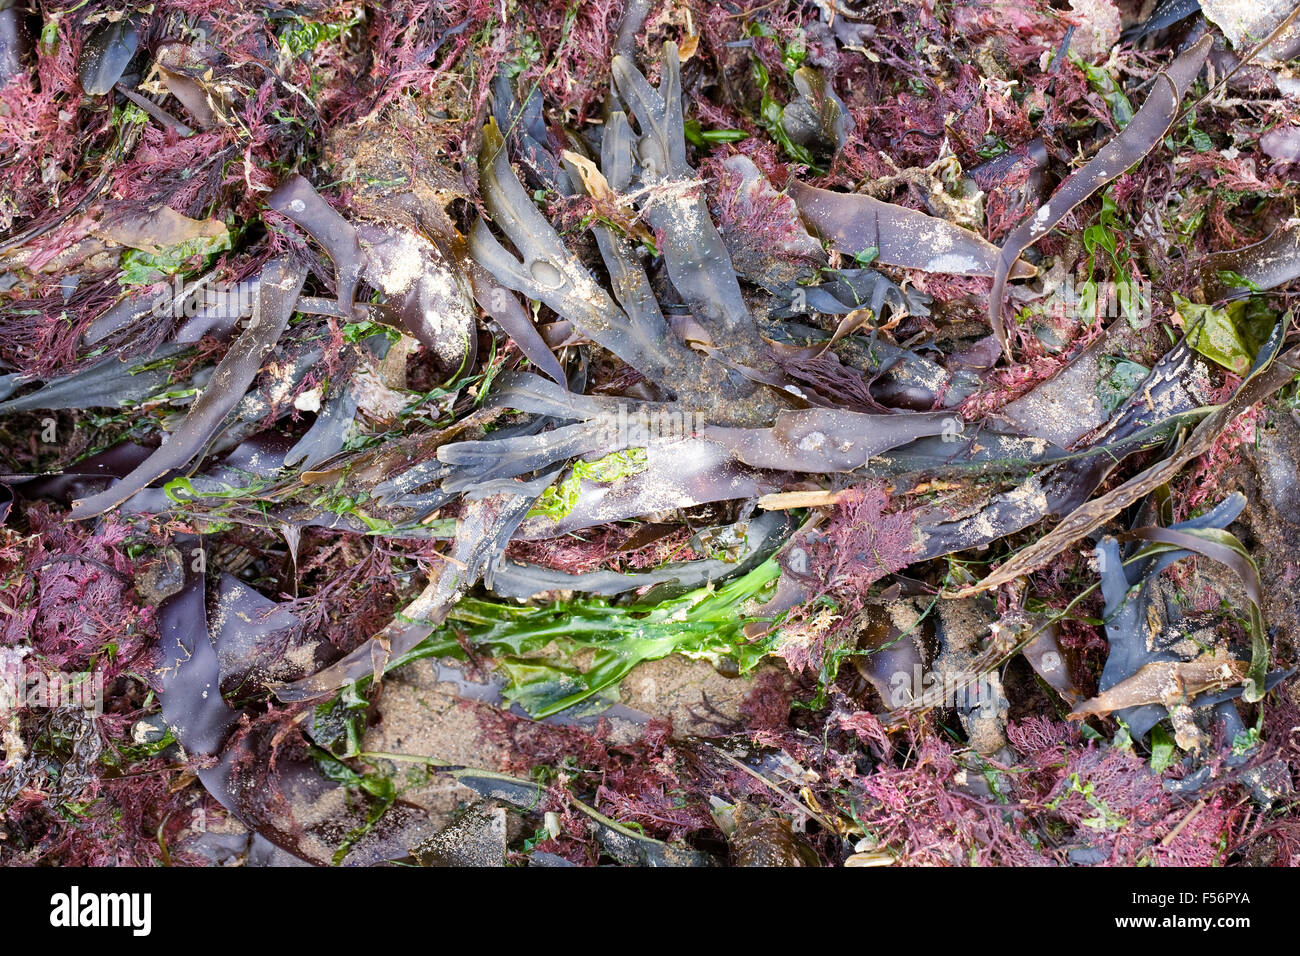 Seaweeds washed onto the beach after a storm. Stock Photo